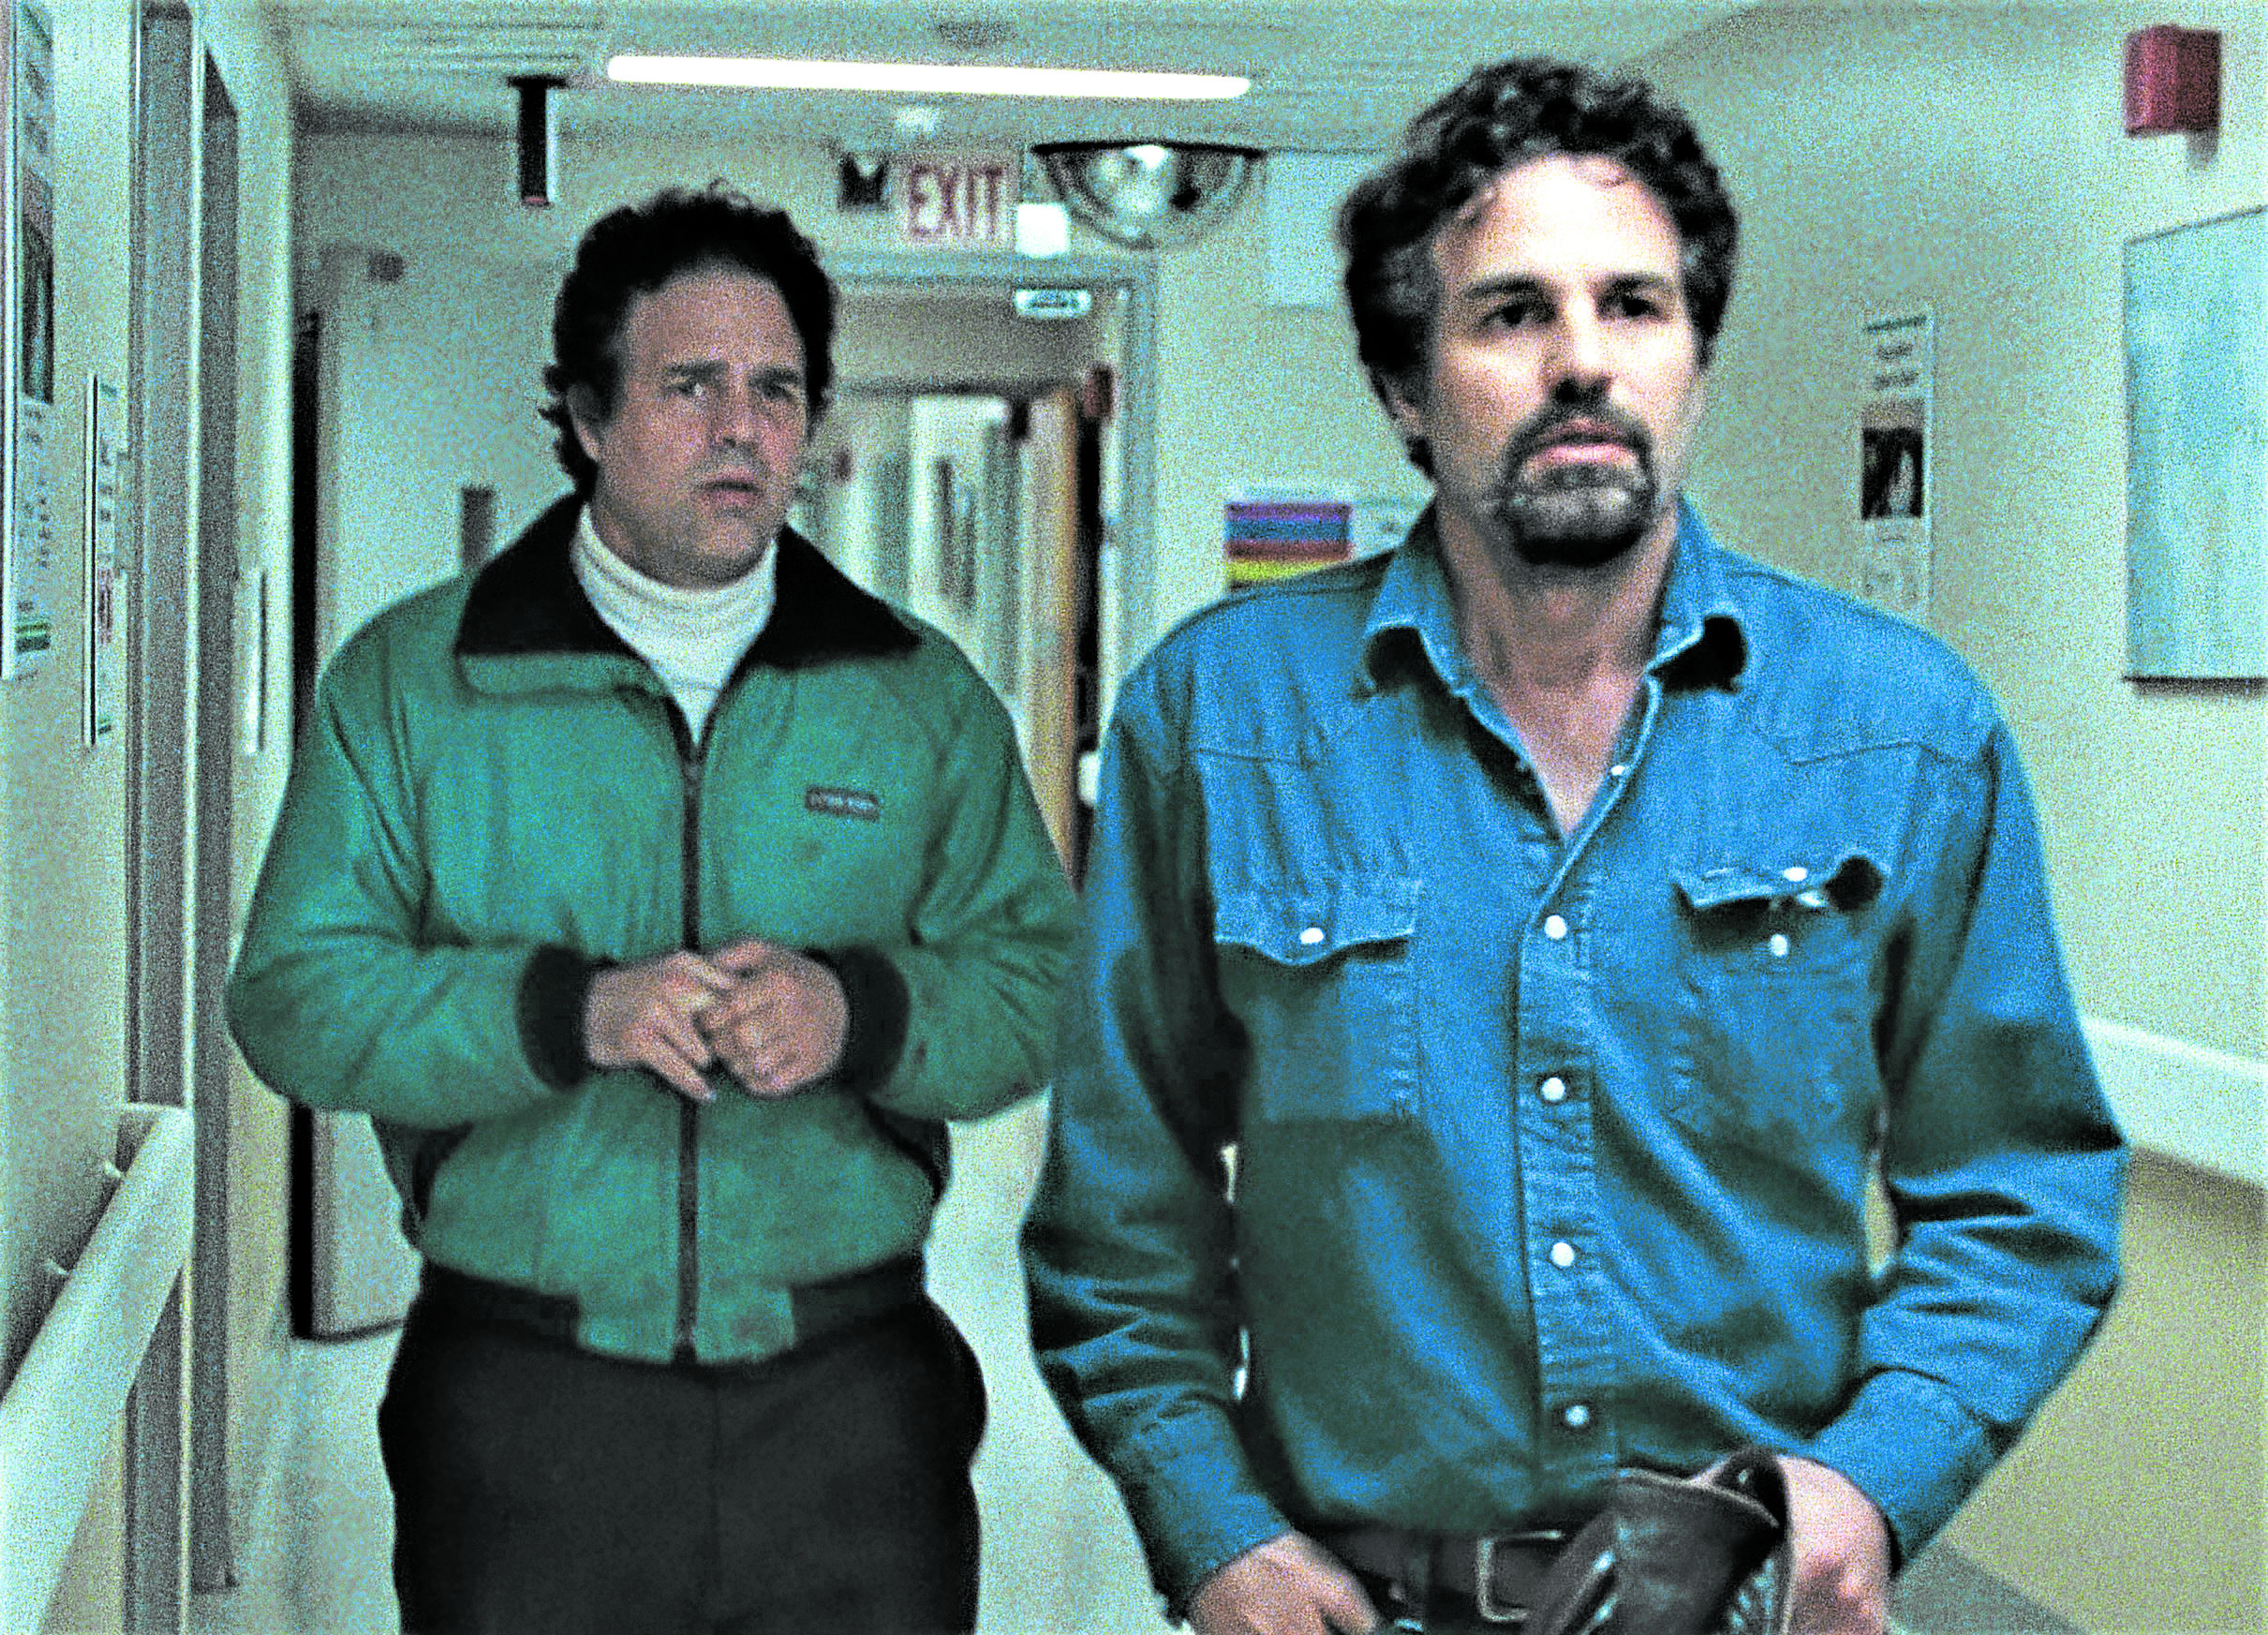 Mark Ruffalo portrays dual role in HBO’s “I Know This Much Is True”